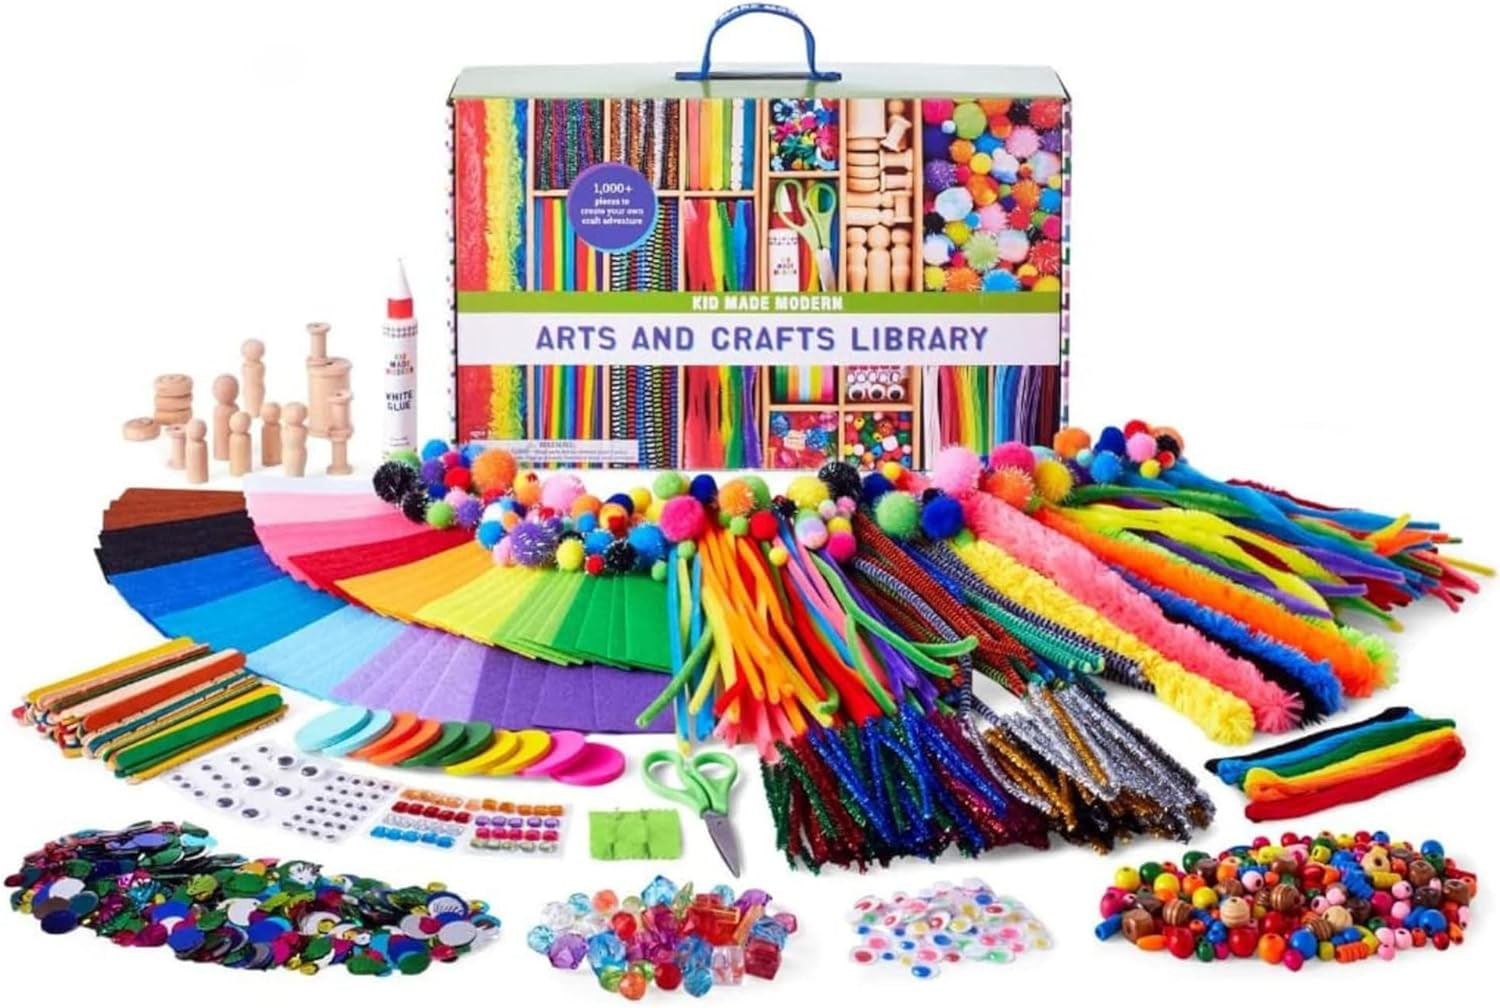 Arts and Crafts Kit - a DIY 1000+ Piece Hobby Craft Supplies & Materials Box for Creative Art Projects for Kids Ages 4 5 6 7 8 9 10 11 & 12 Year Old Girls & Boys